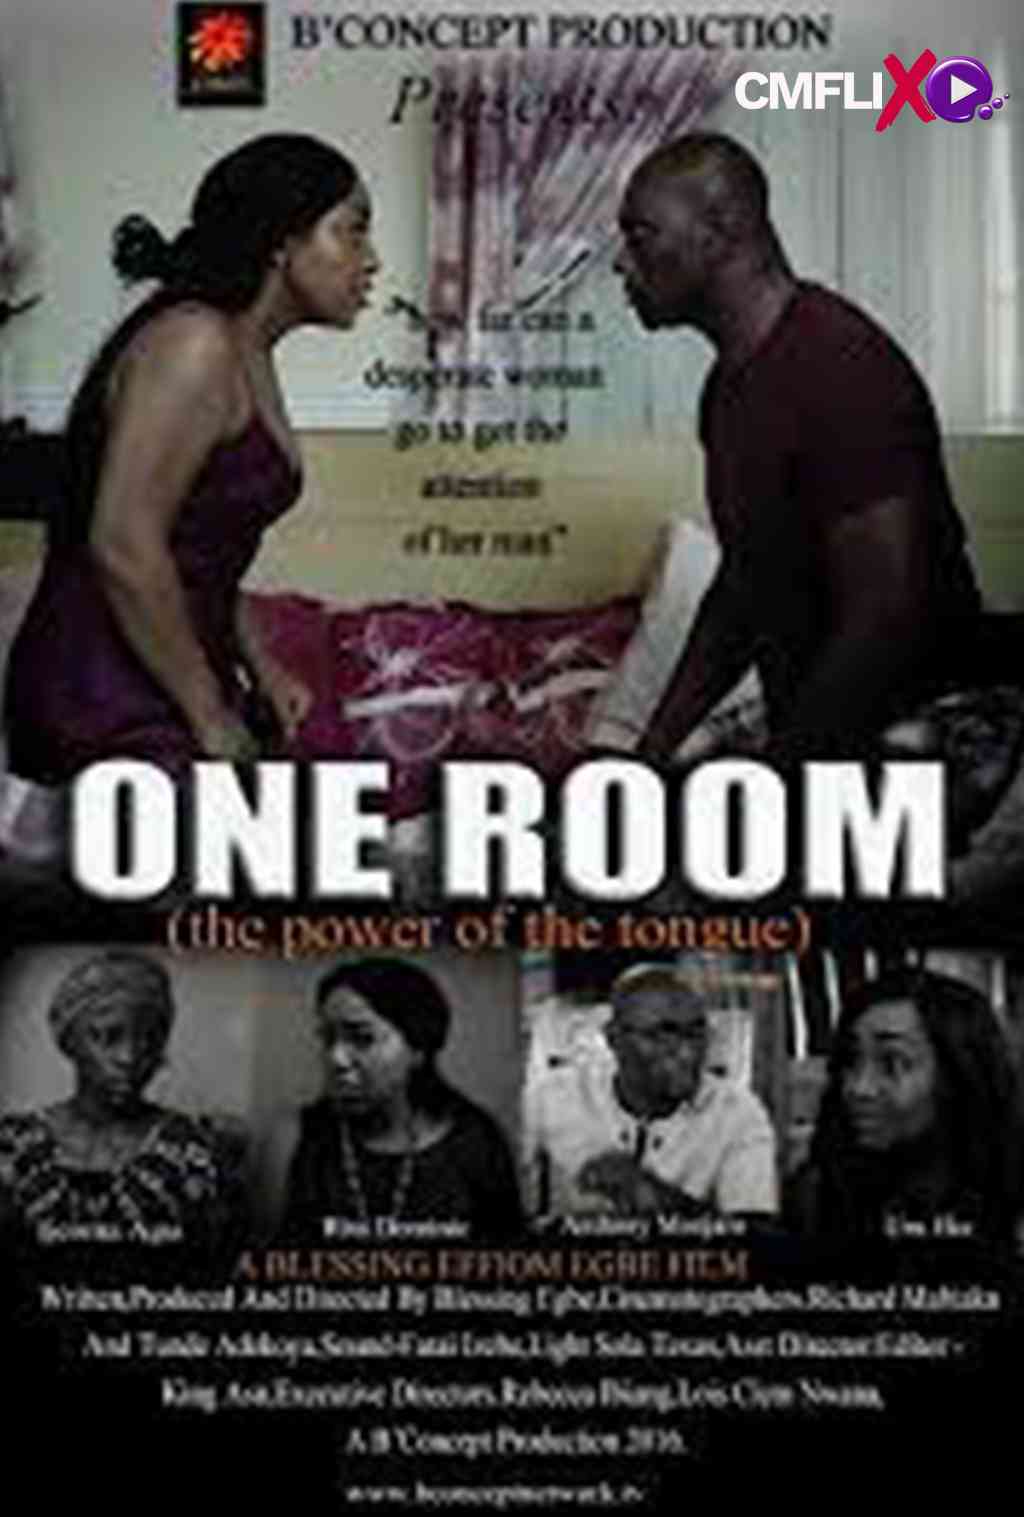 ONE ROOM